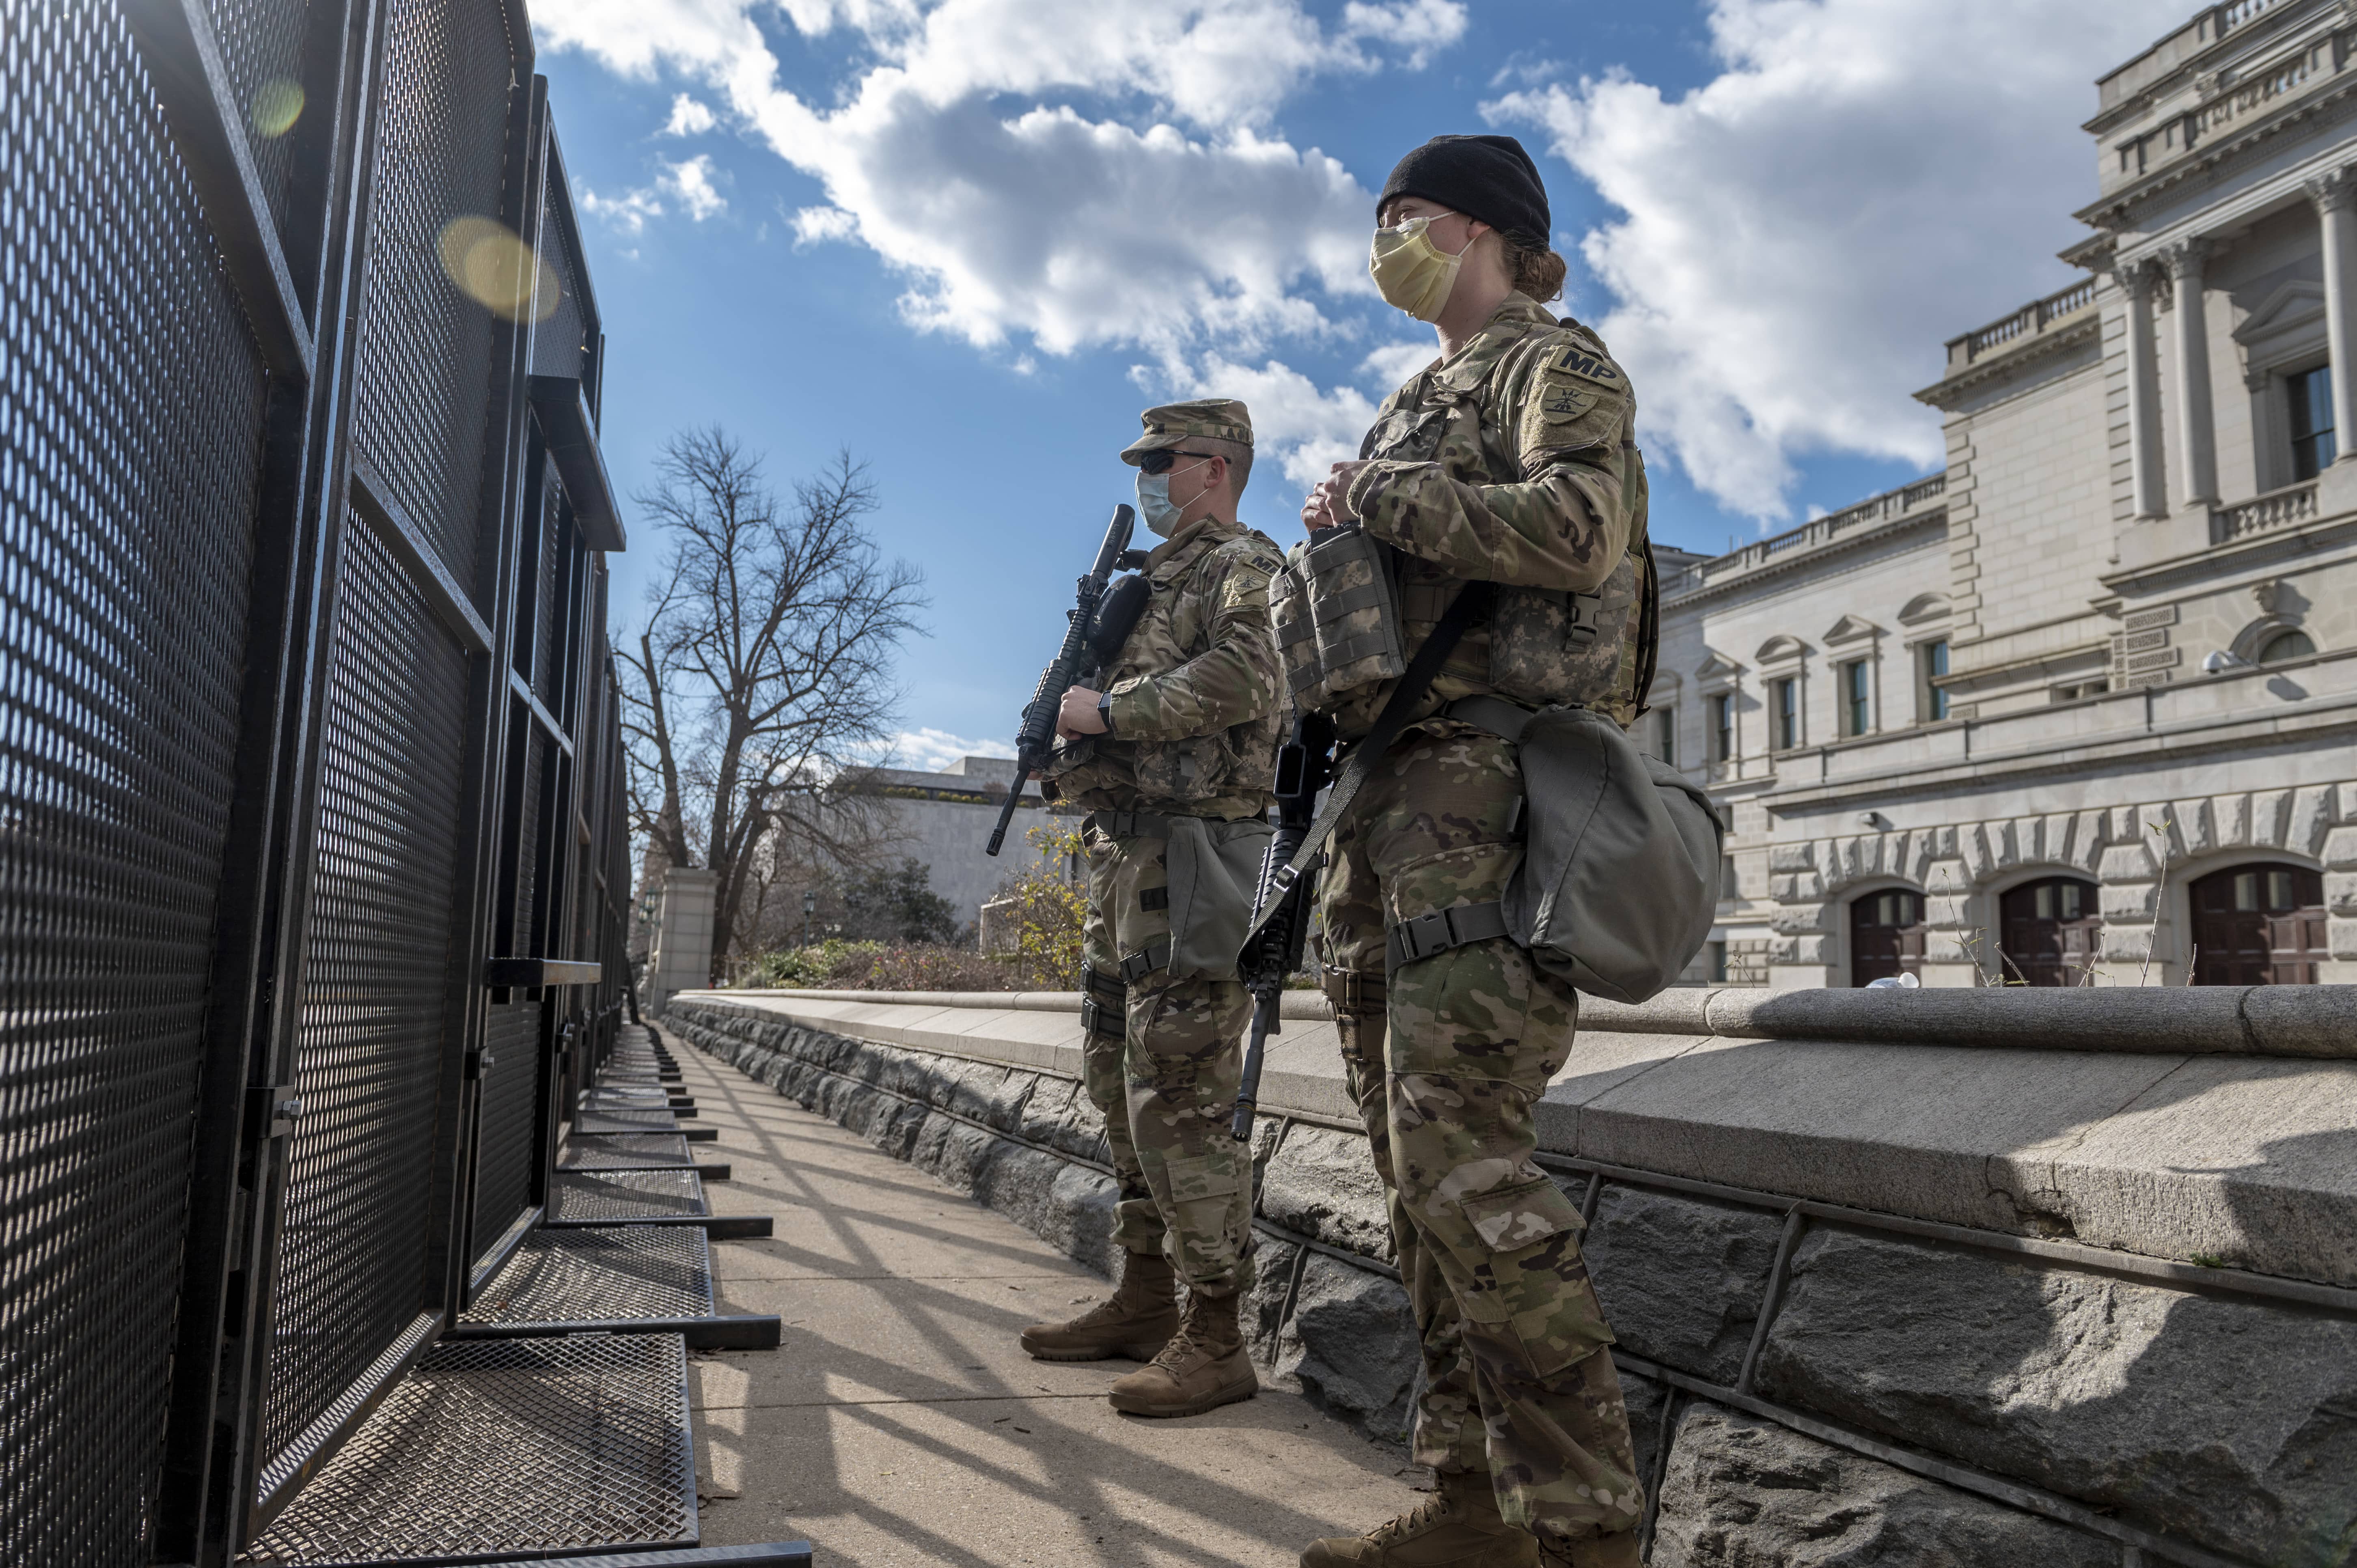 the 191st Military Police Company, North Dakota National Guard, stand guard near the Library of Congress in Washington, D.C